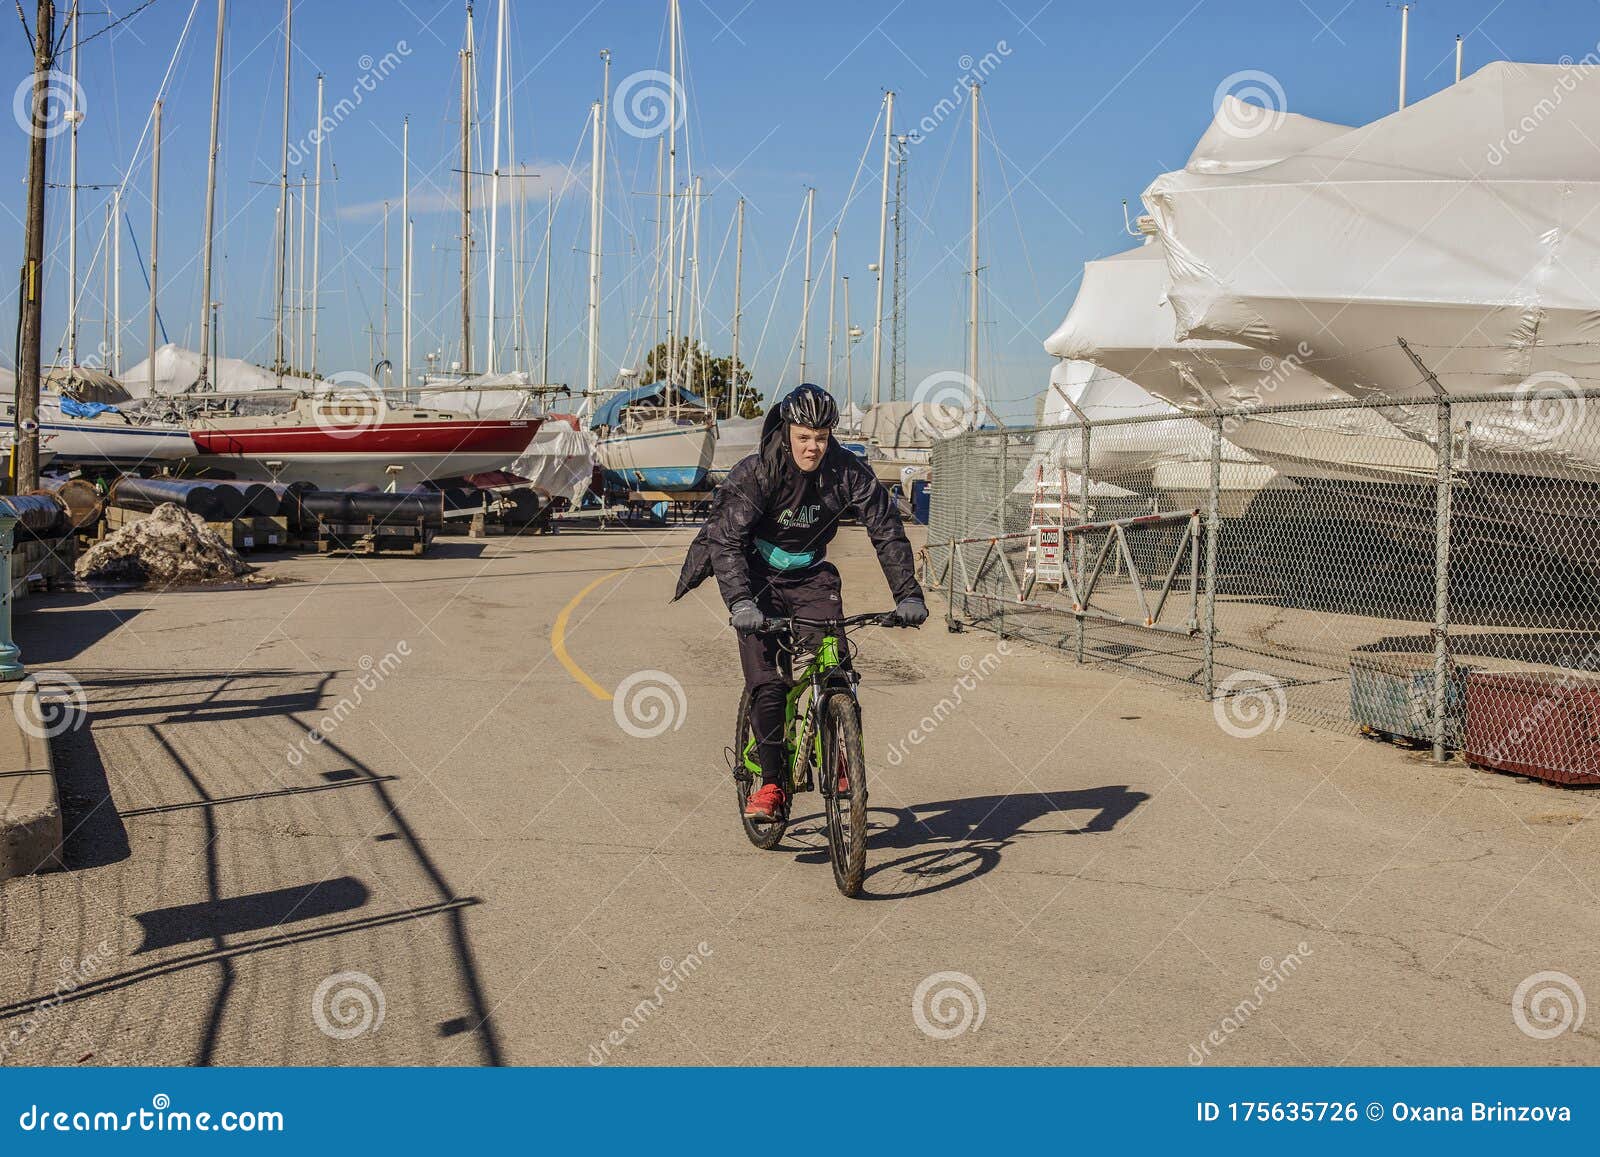 St.Catharines, Canada- 03/09/2020; A Teenager Rides A ...